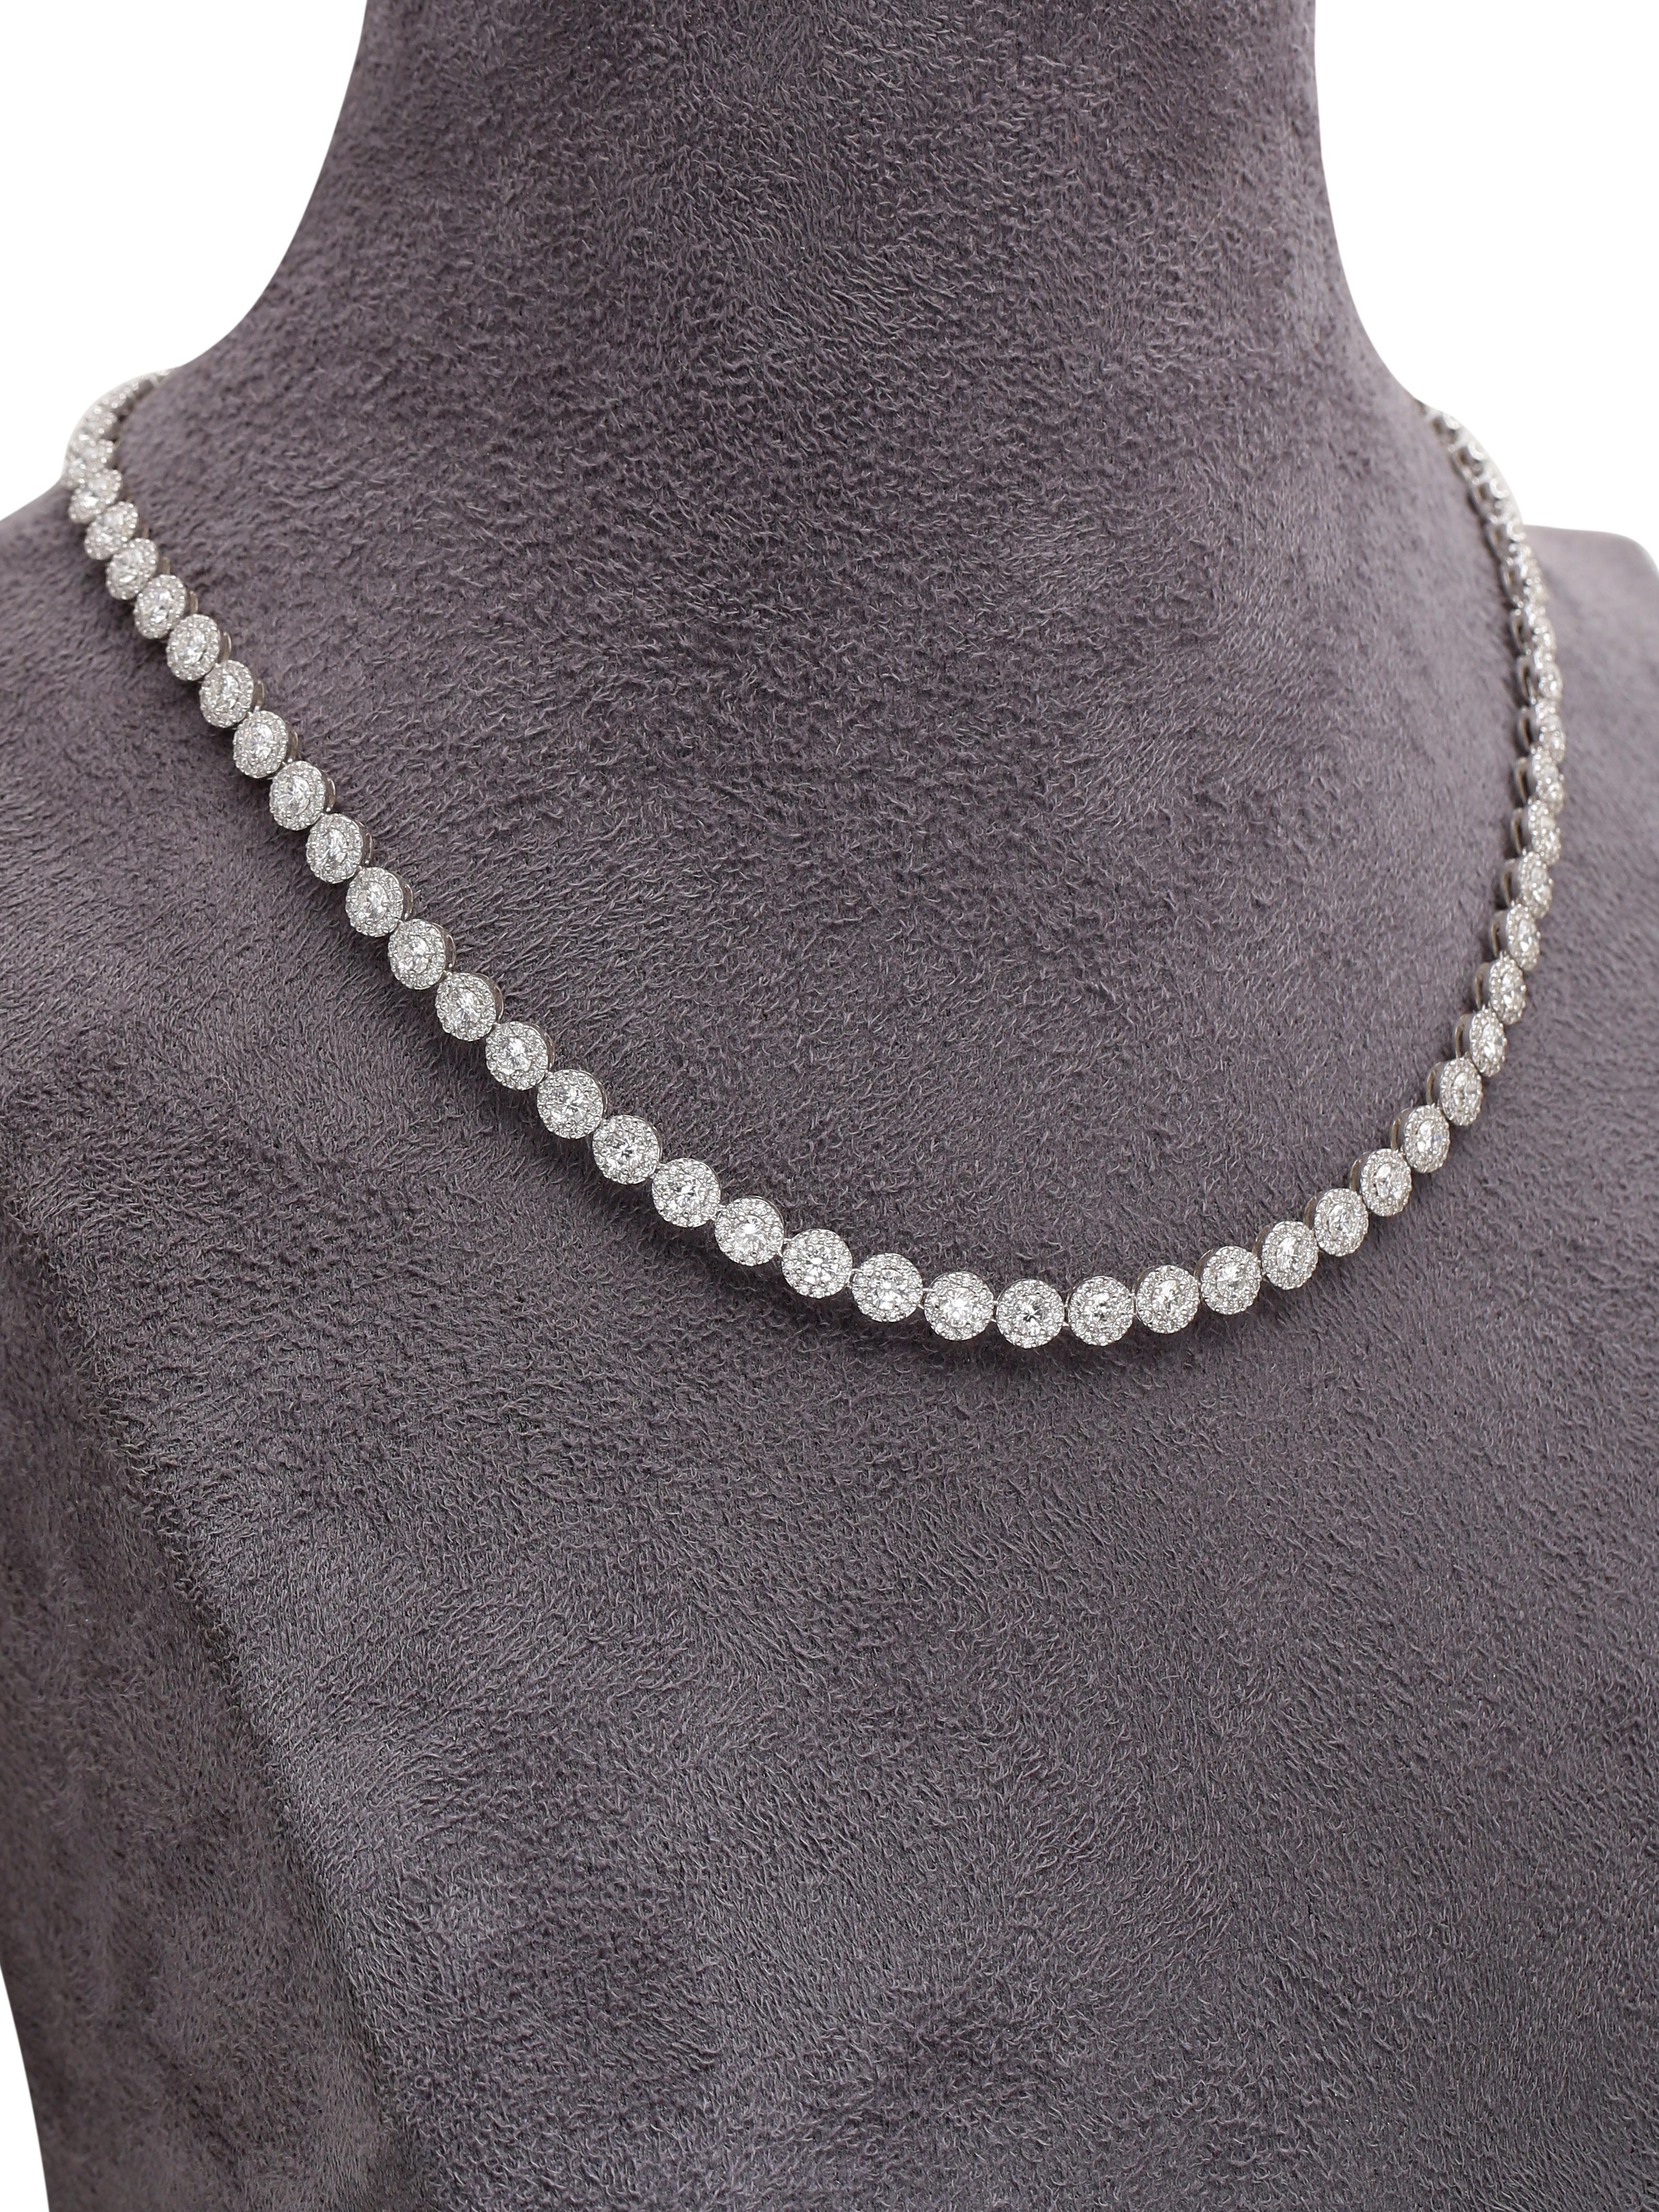 A beautiful evergreen diamond necklace made with fine quality diamonds set together in a cluster to give a grand look. The Necklace is a timeless piece and because of the elegant design can be worn by women all ages. 
Its a piece worthy of being in